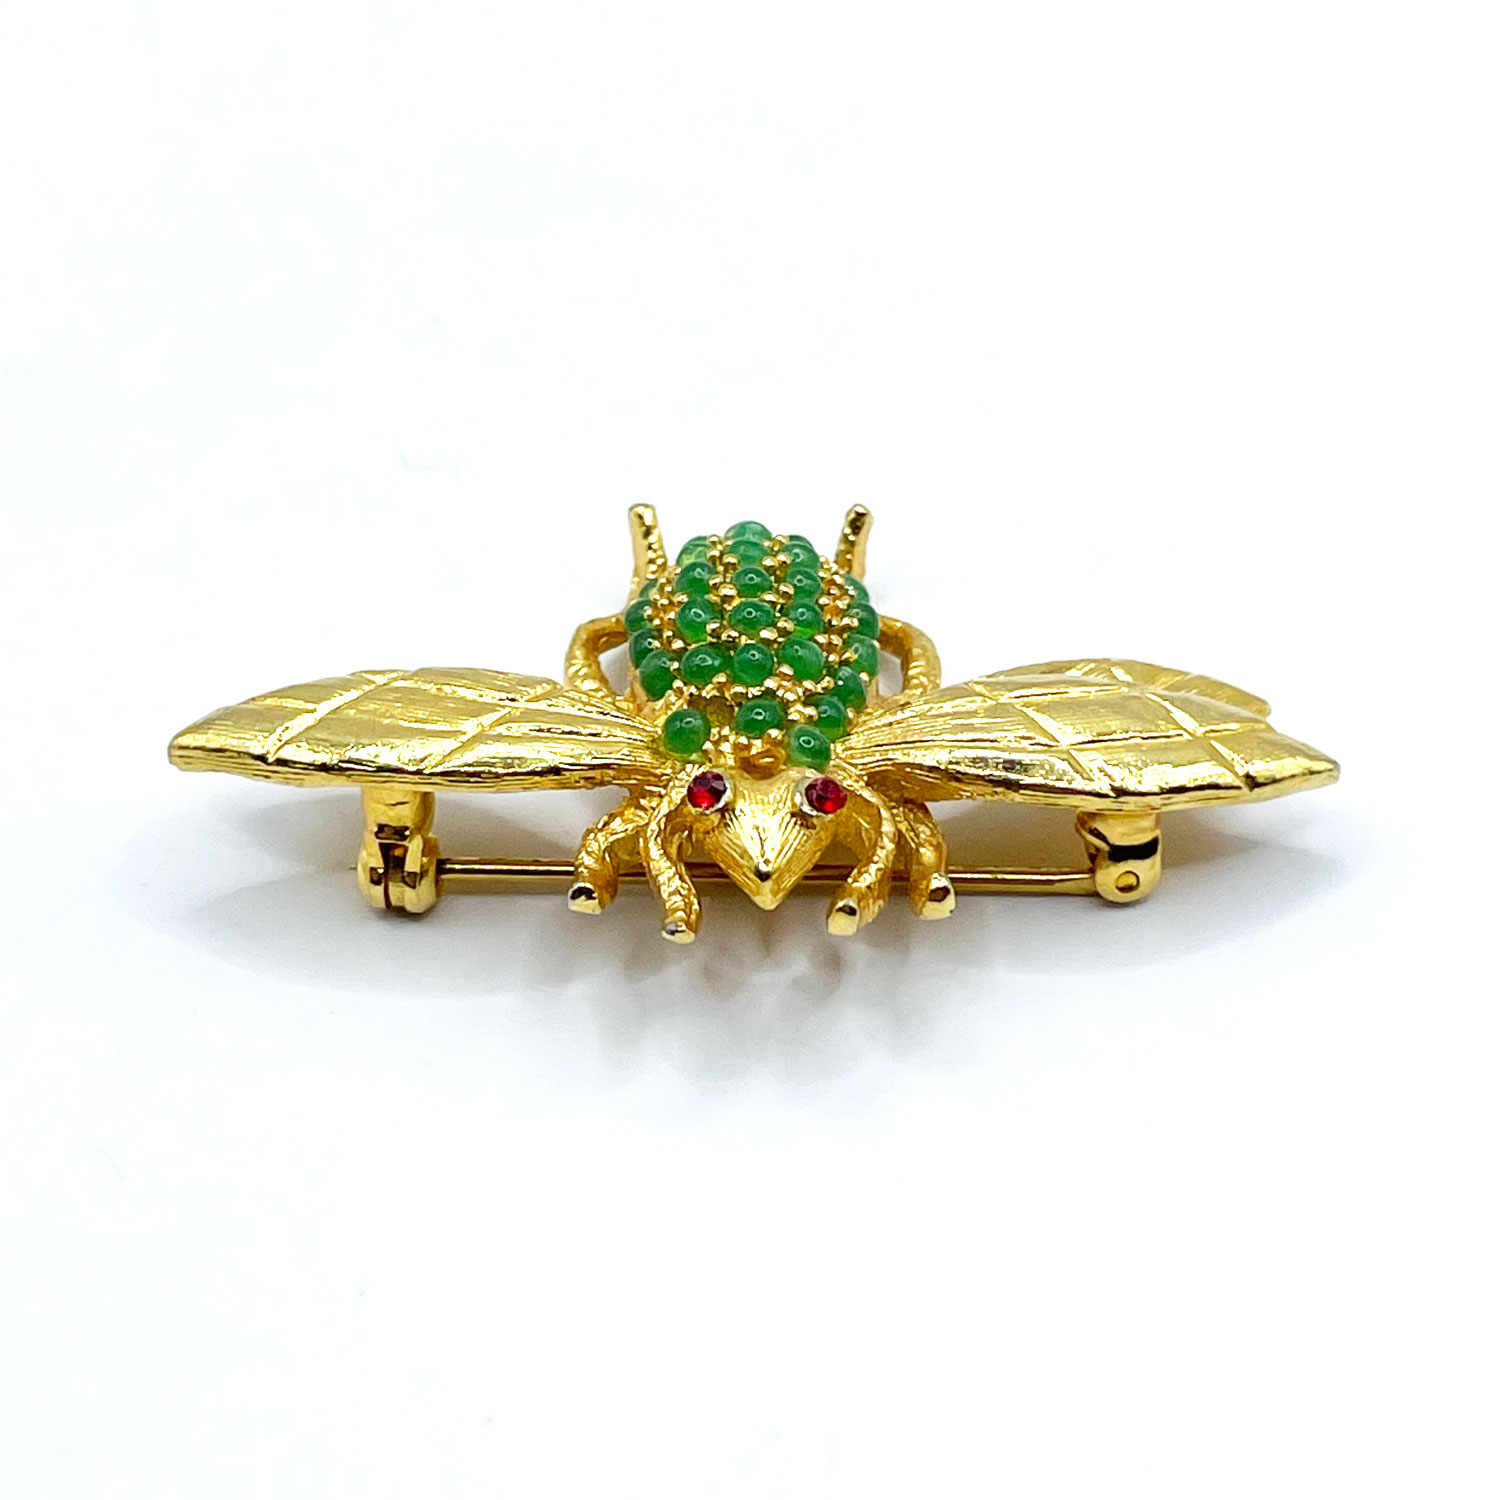 Frances Hirsch insect brooch